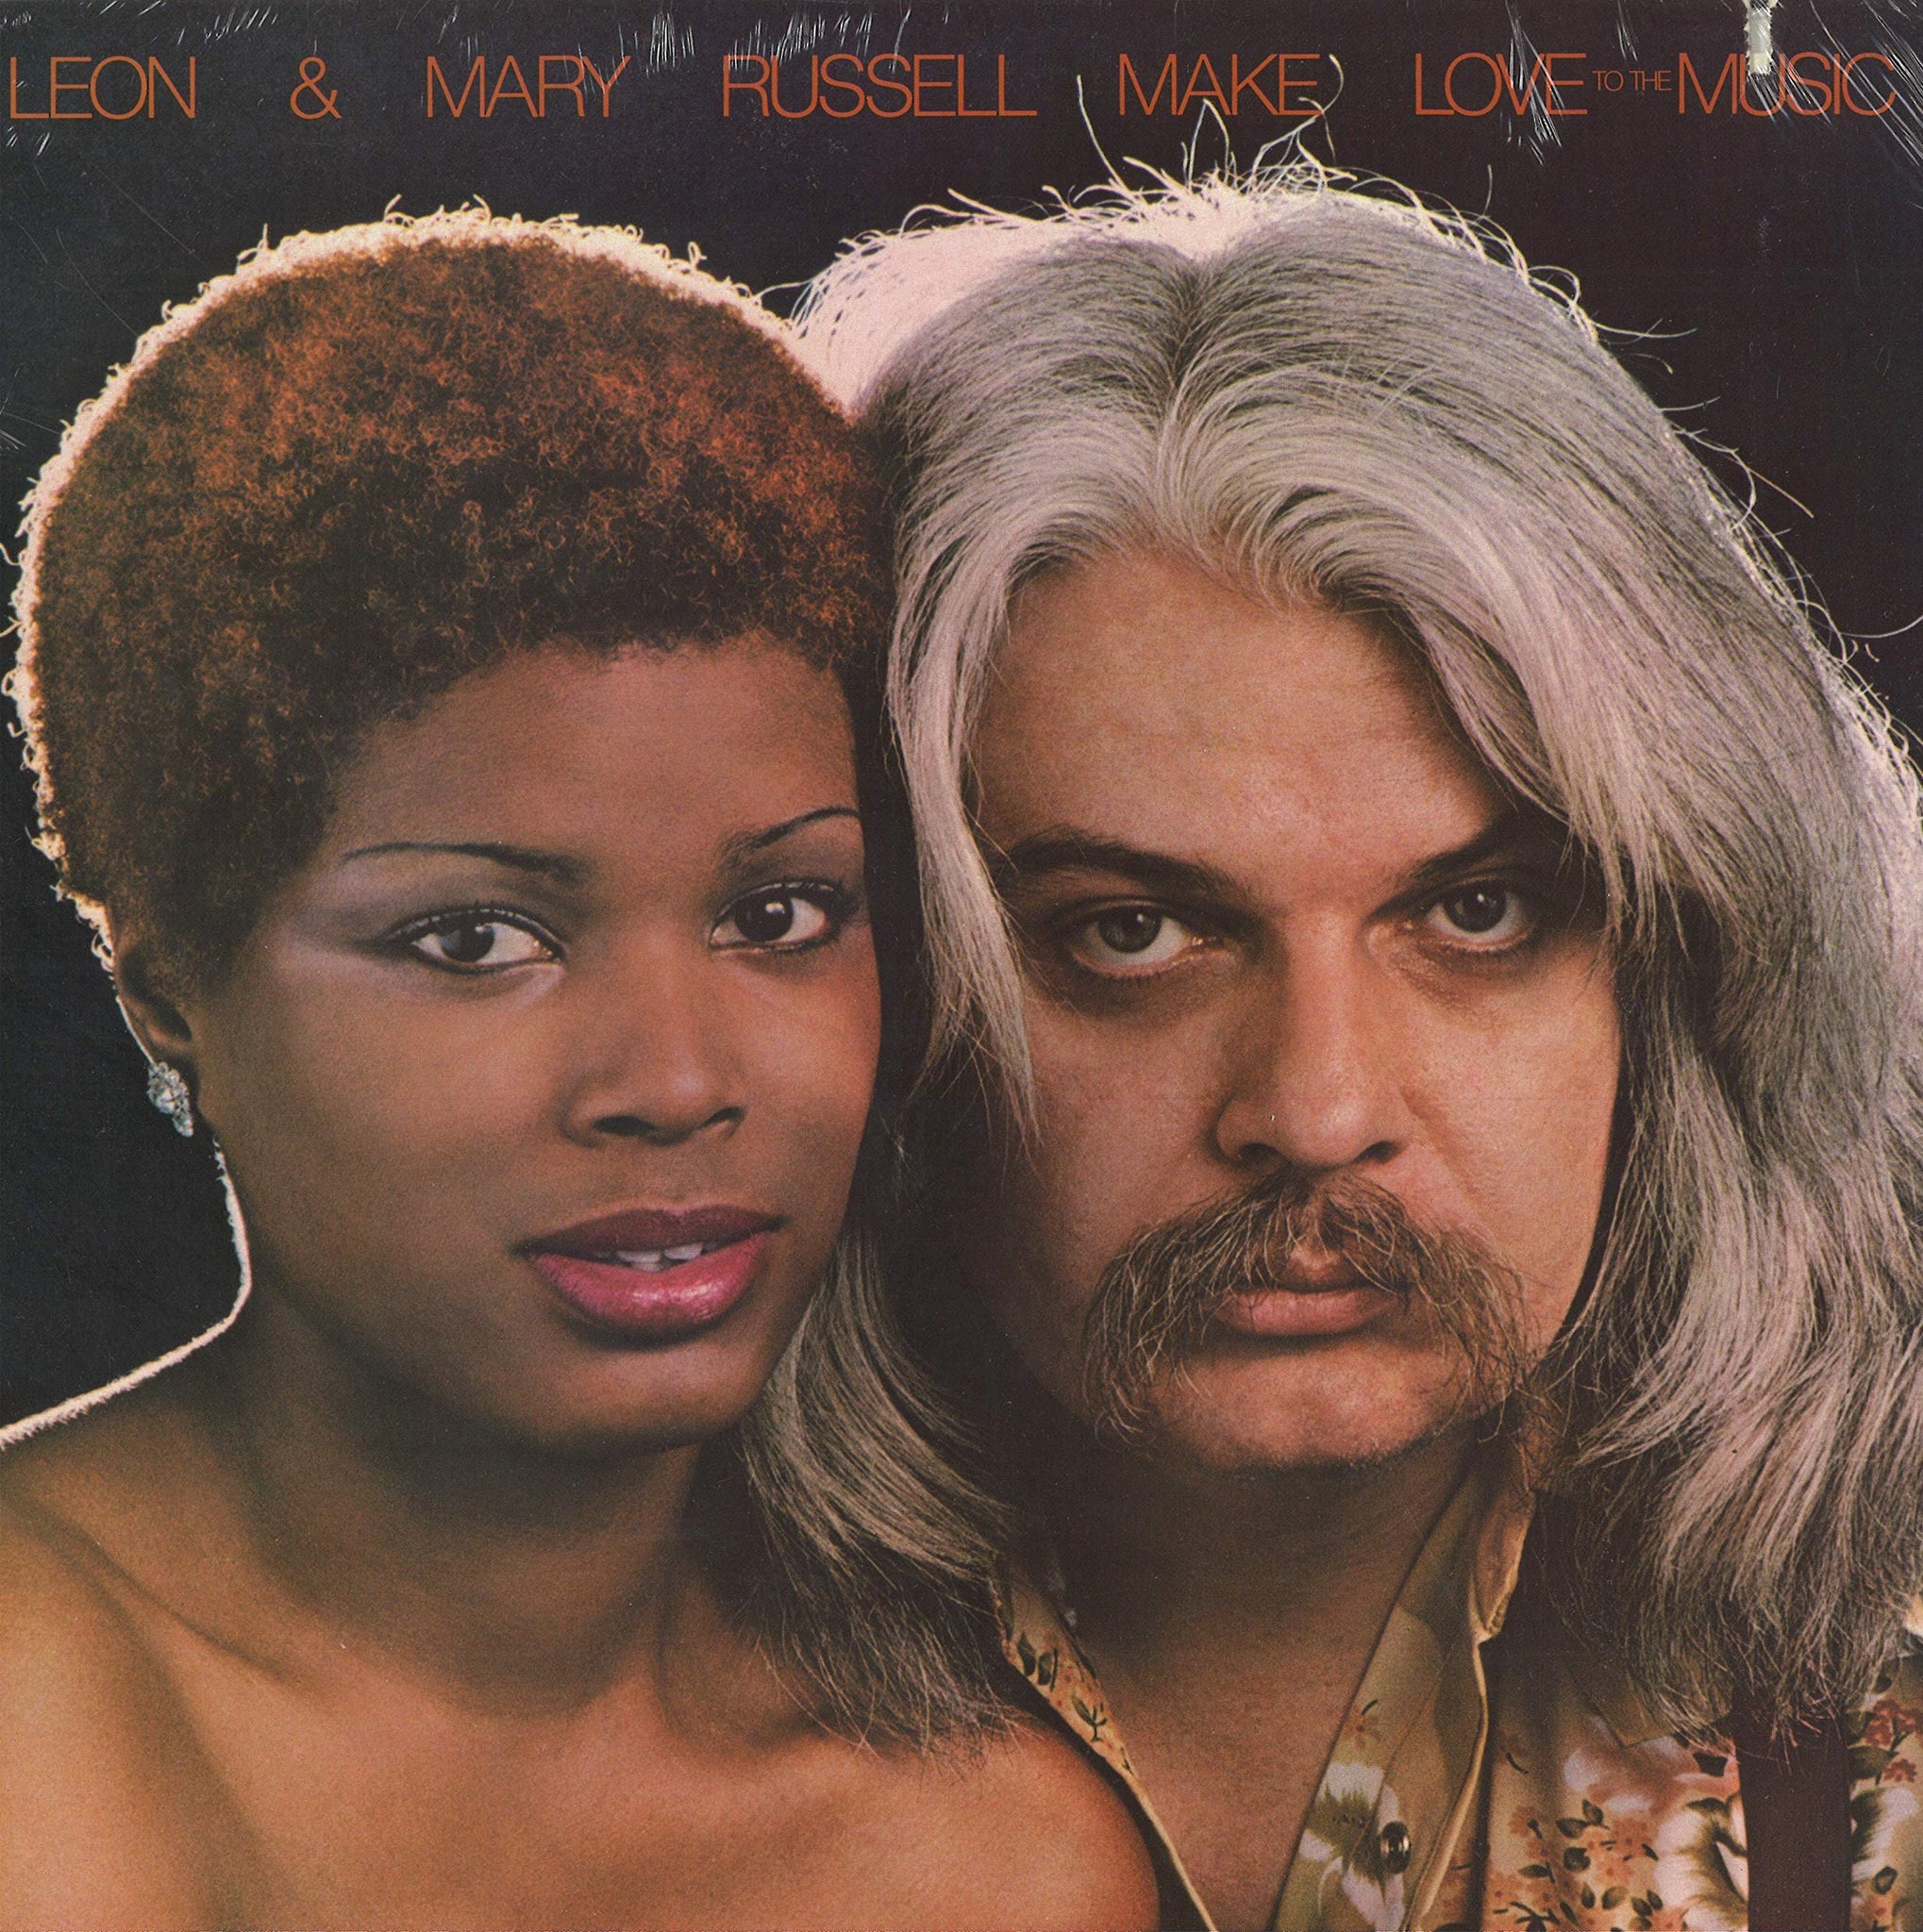 Leon & Mary Russell Make Love to the Music